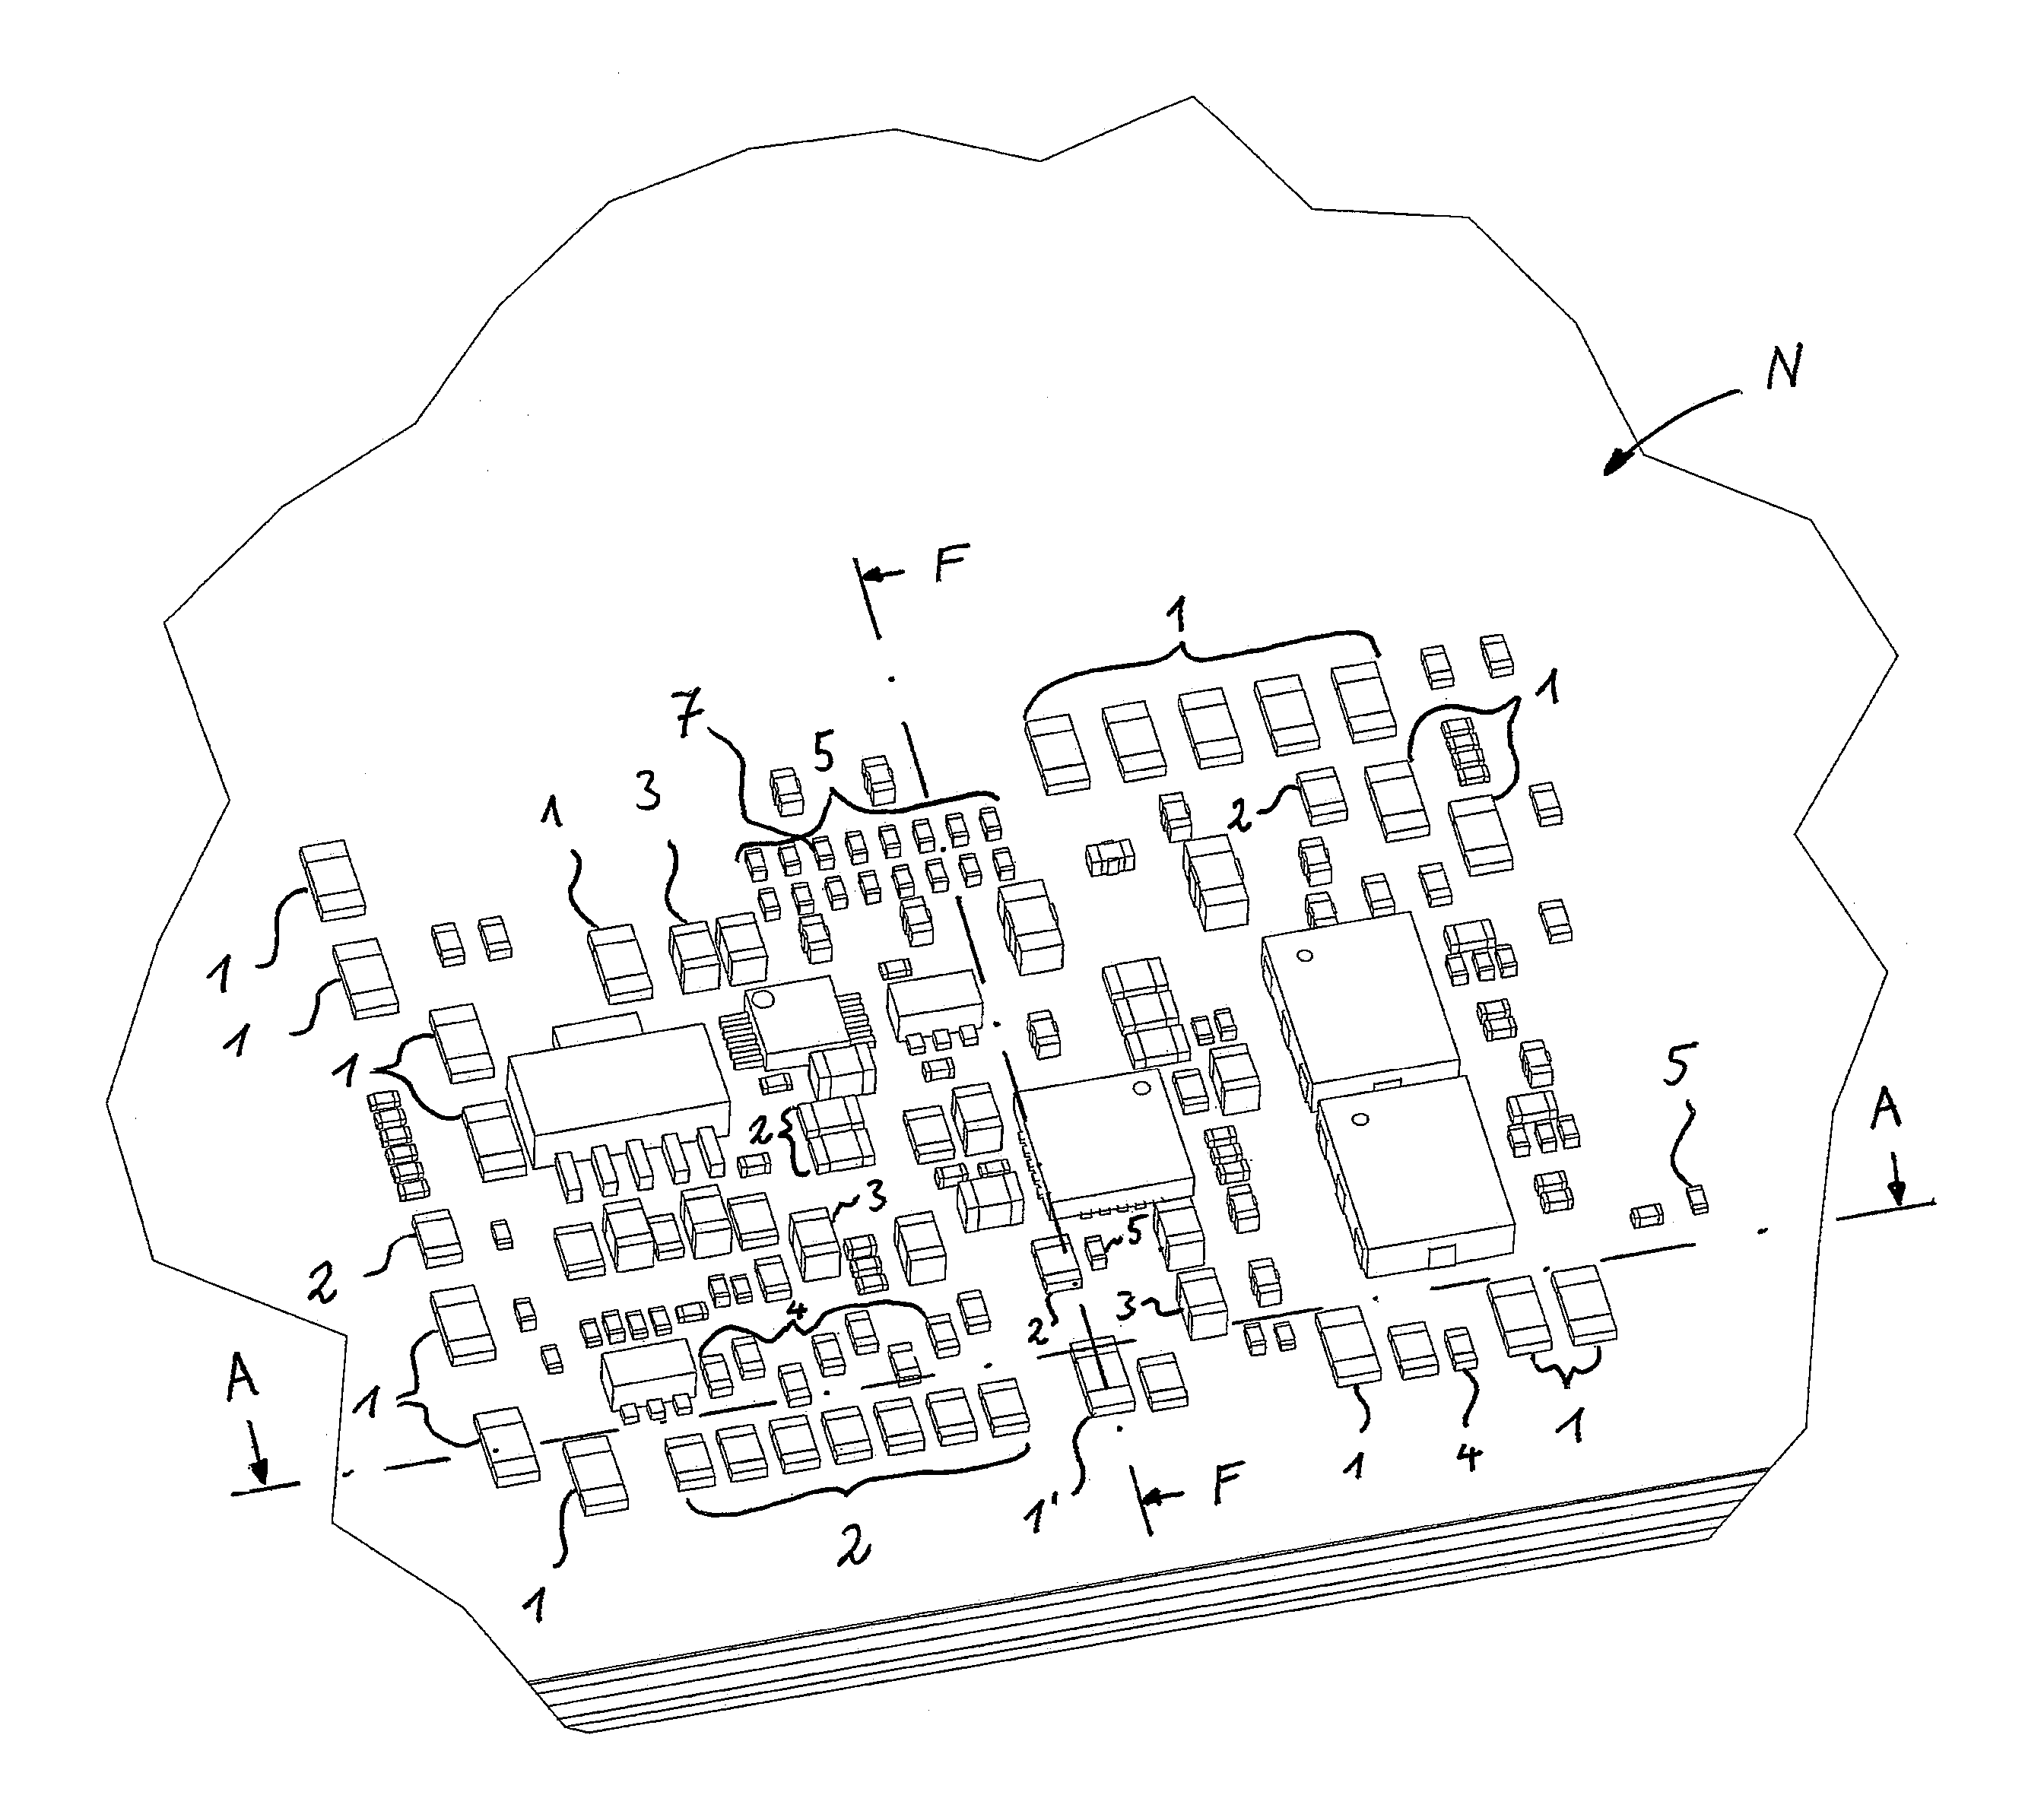 Method of cooling electronic circuit boards using surface mounted devices